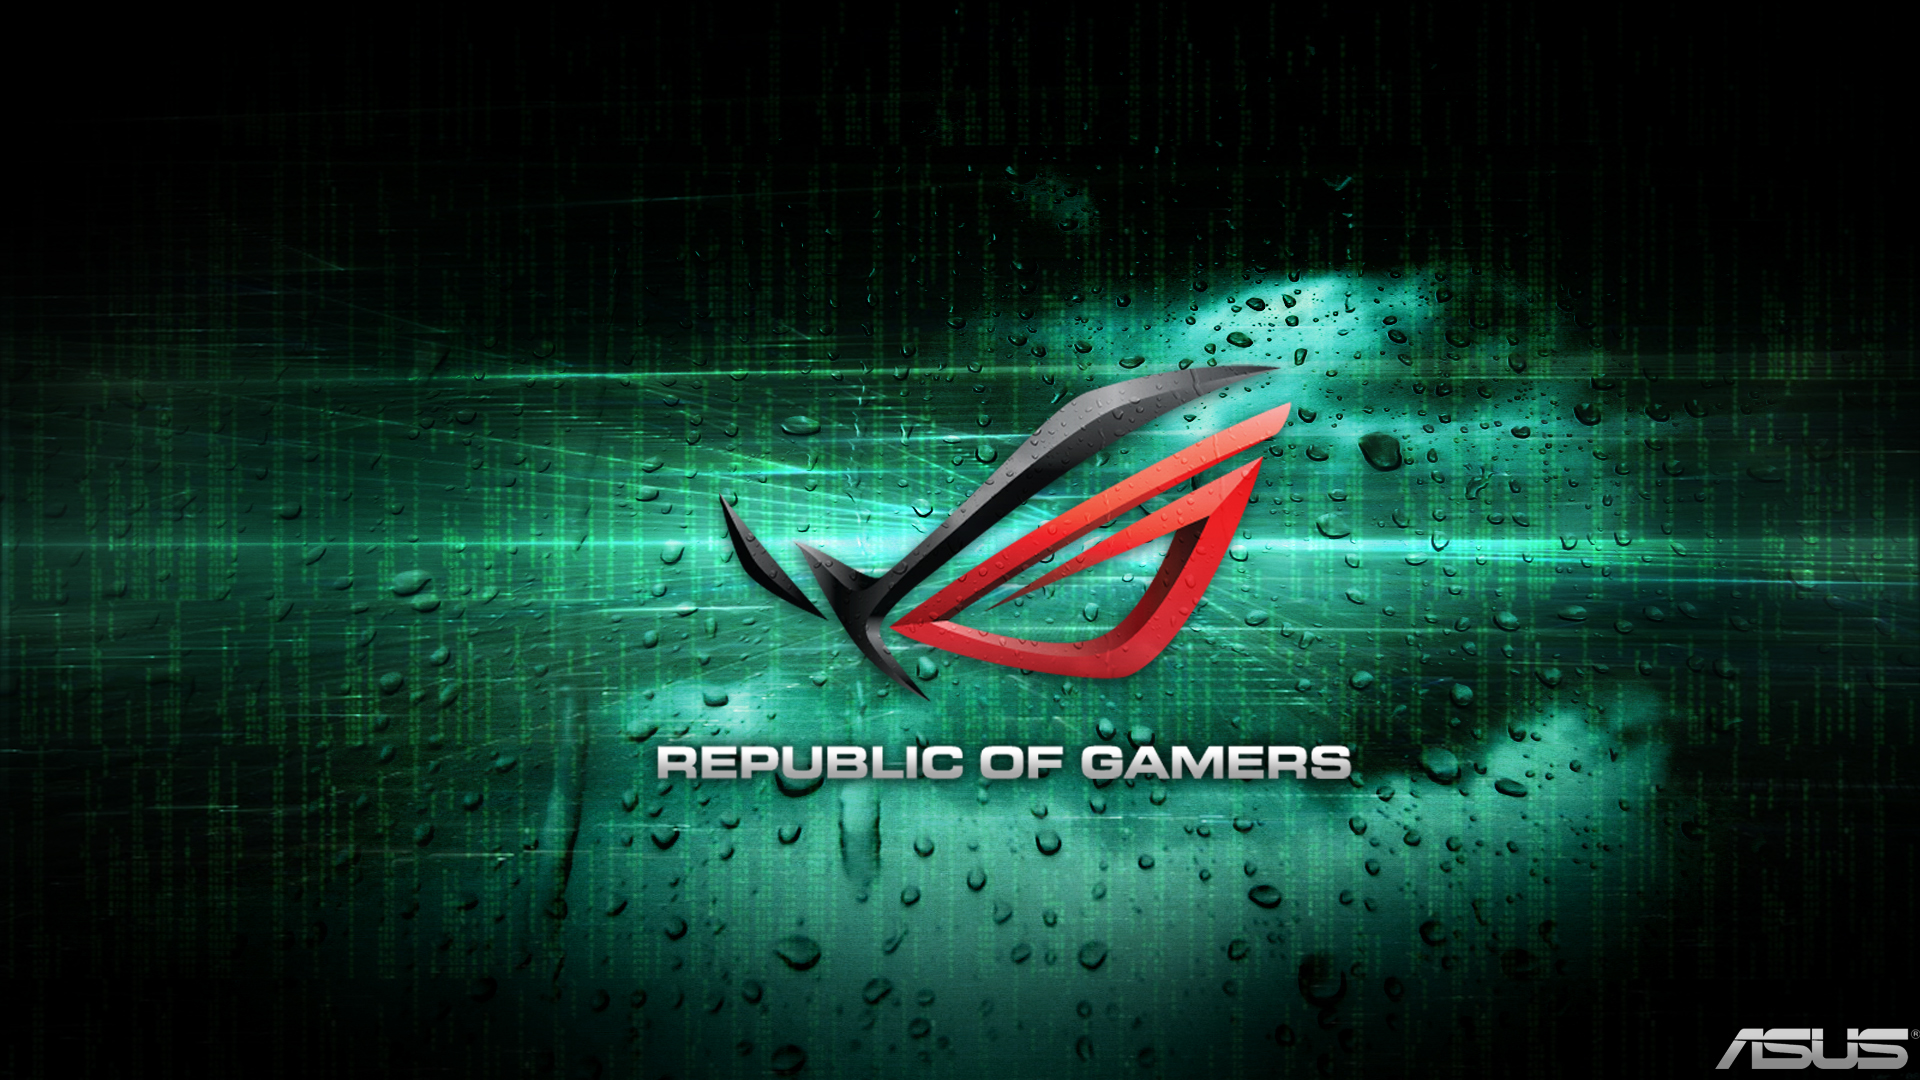 Photos asus republic of gamers wallpaper 1920x1080 page